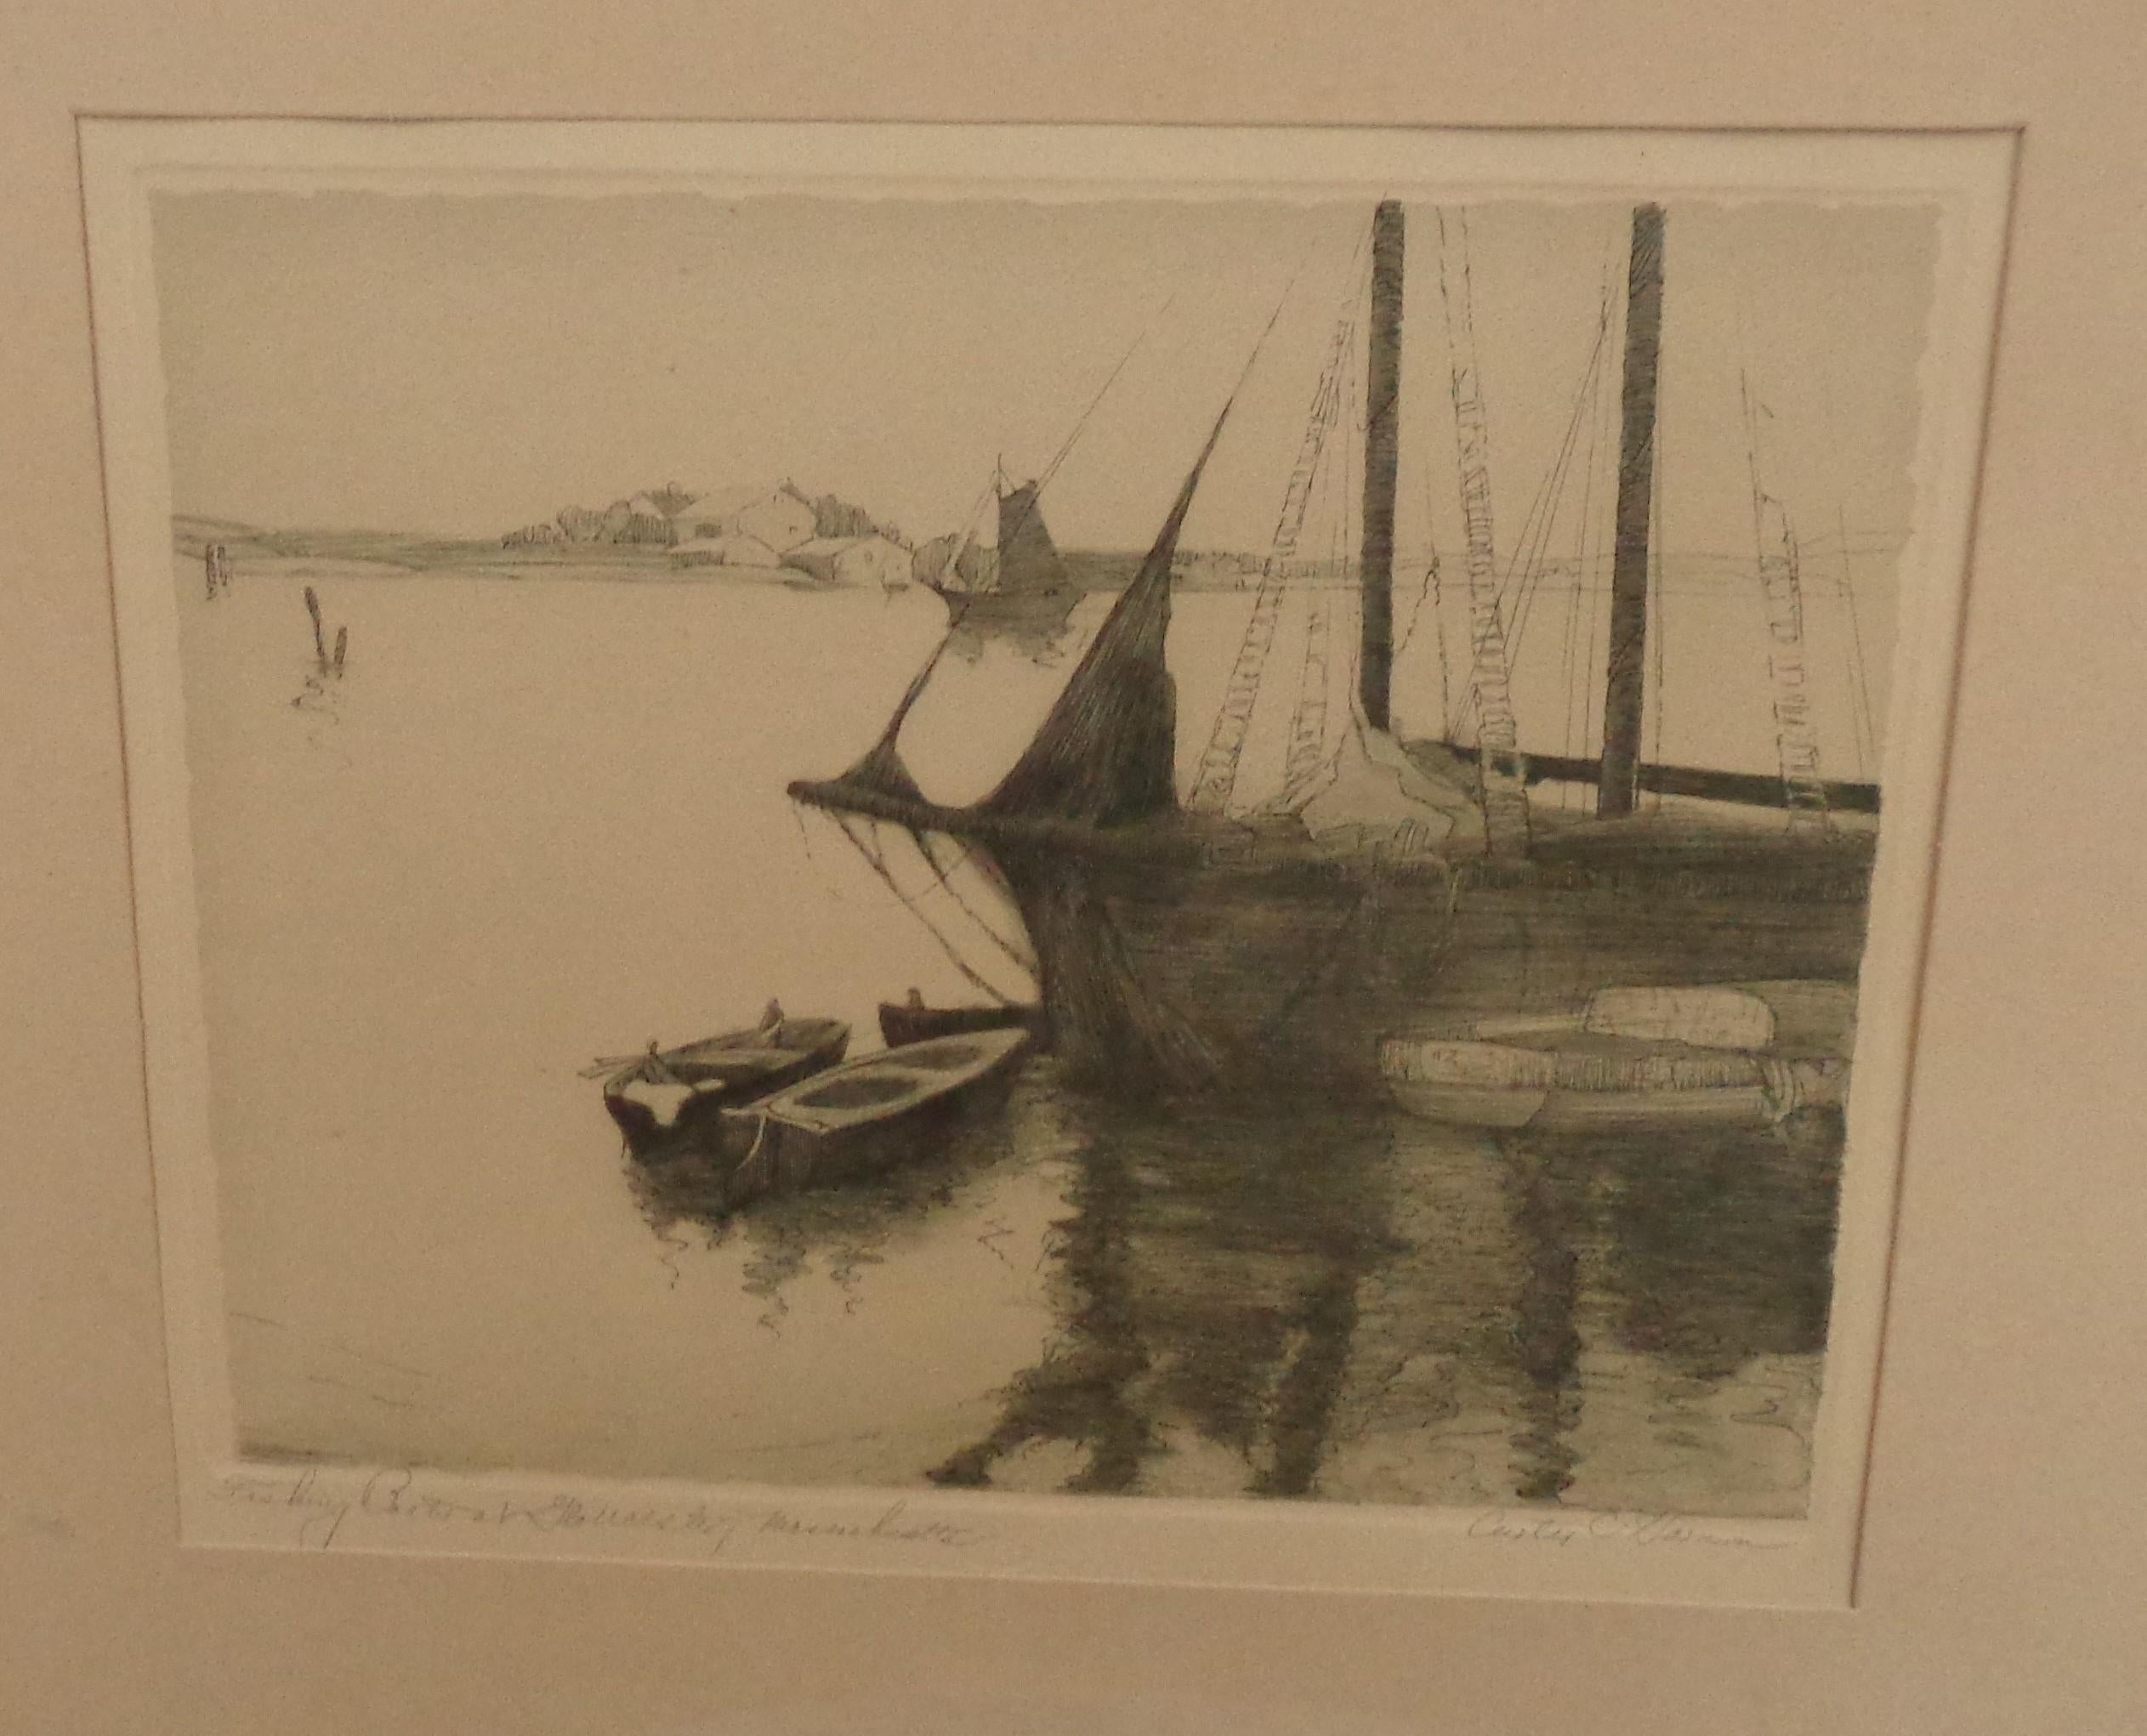 Curtis C. Harmon
(American, 20th century)
Fishing Boats at Gloucester, Massachusetts
etching
signed Curtis C. Harmon (lower right) and titled (lower left)
10 x 12 inches.
 Discoloration from age( 2nd, 5th and 6th pics are most accurate), otherwise